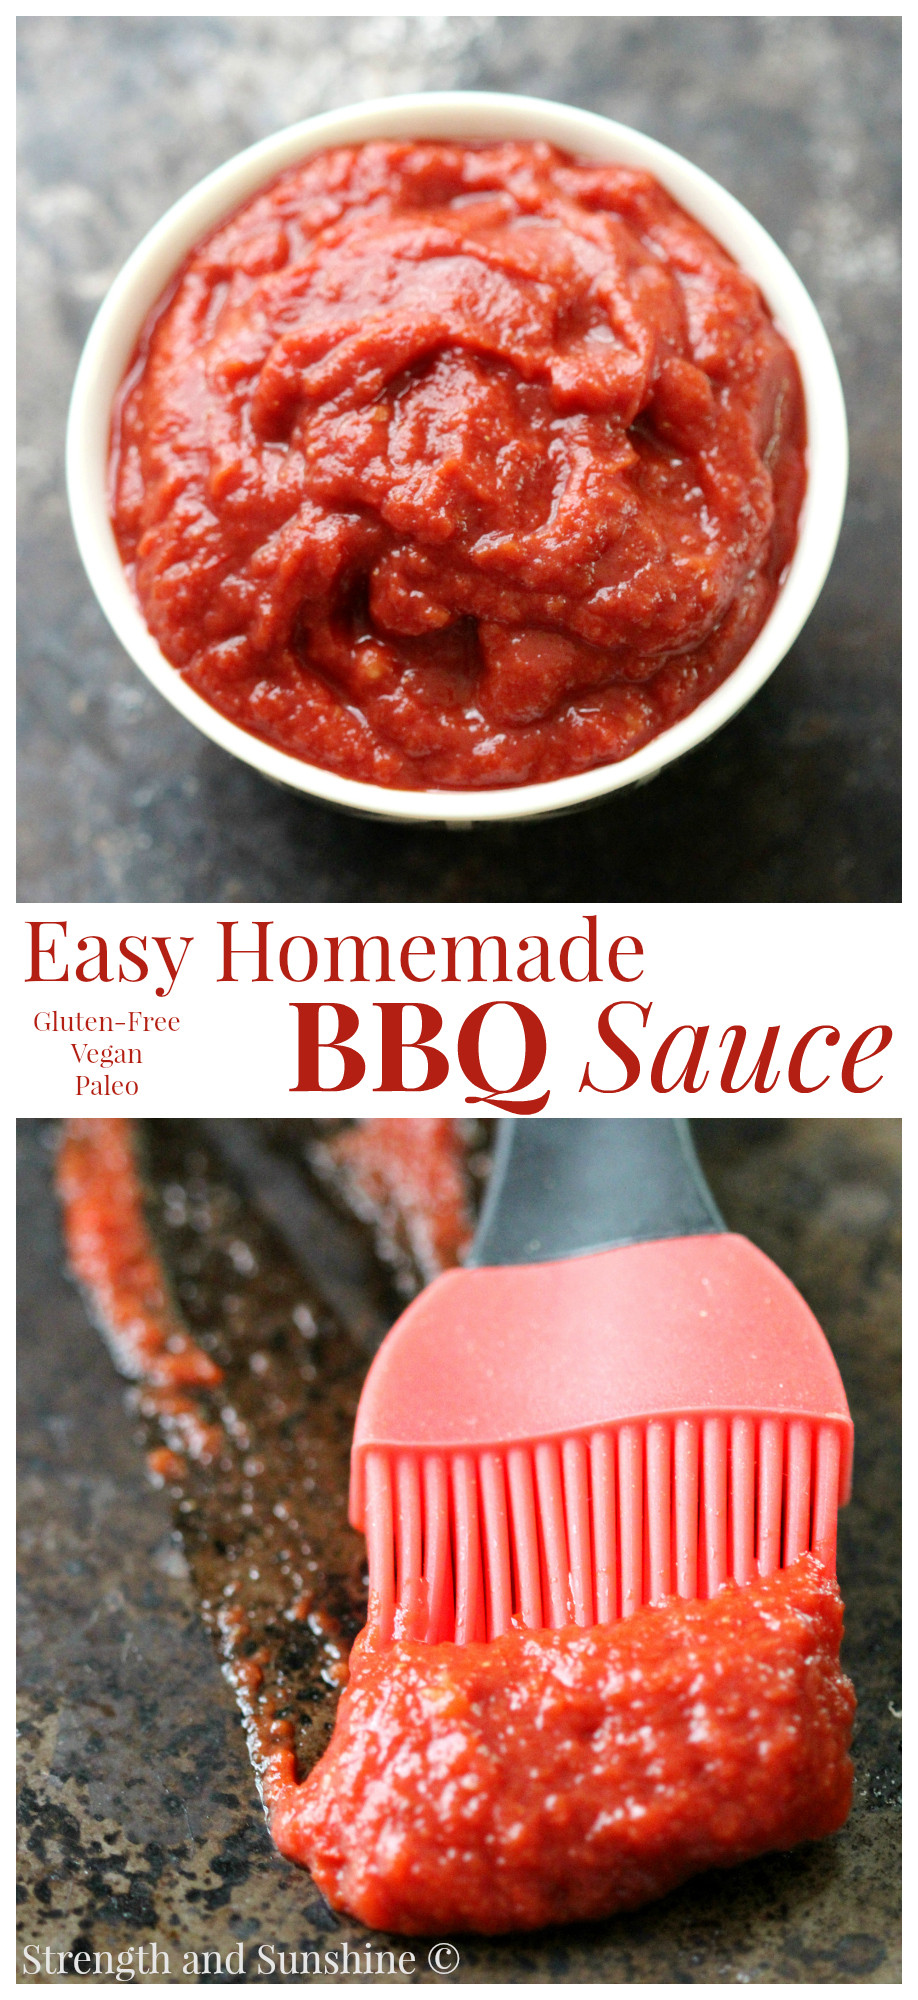 Healthy Bbq Sauce Recipe
 healthy barbecue sauce brands